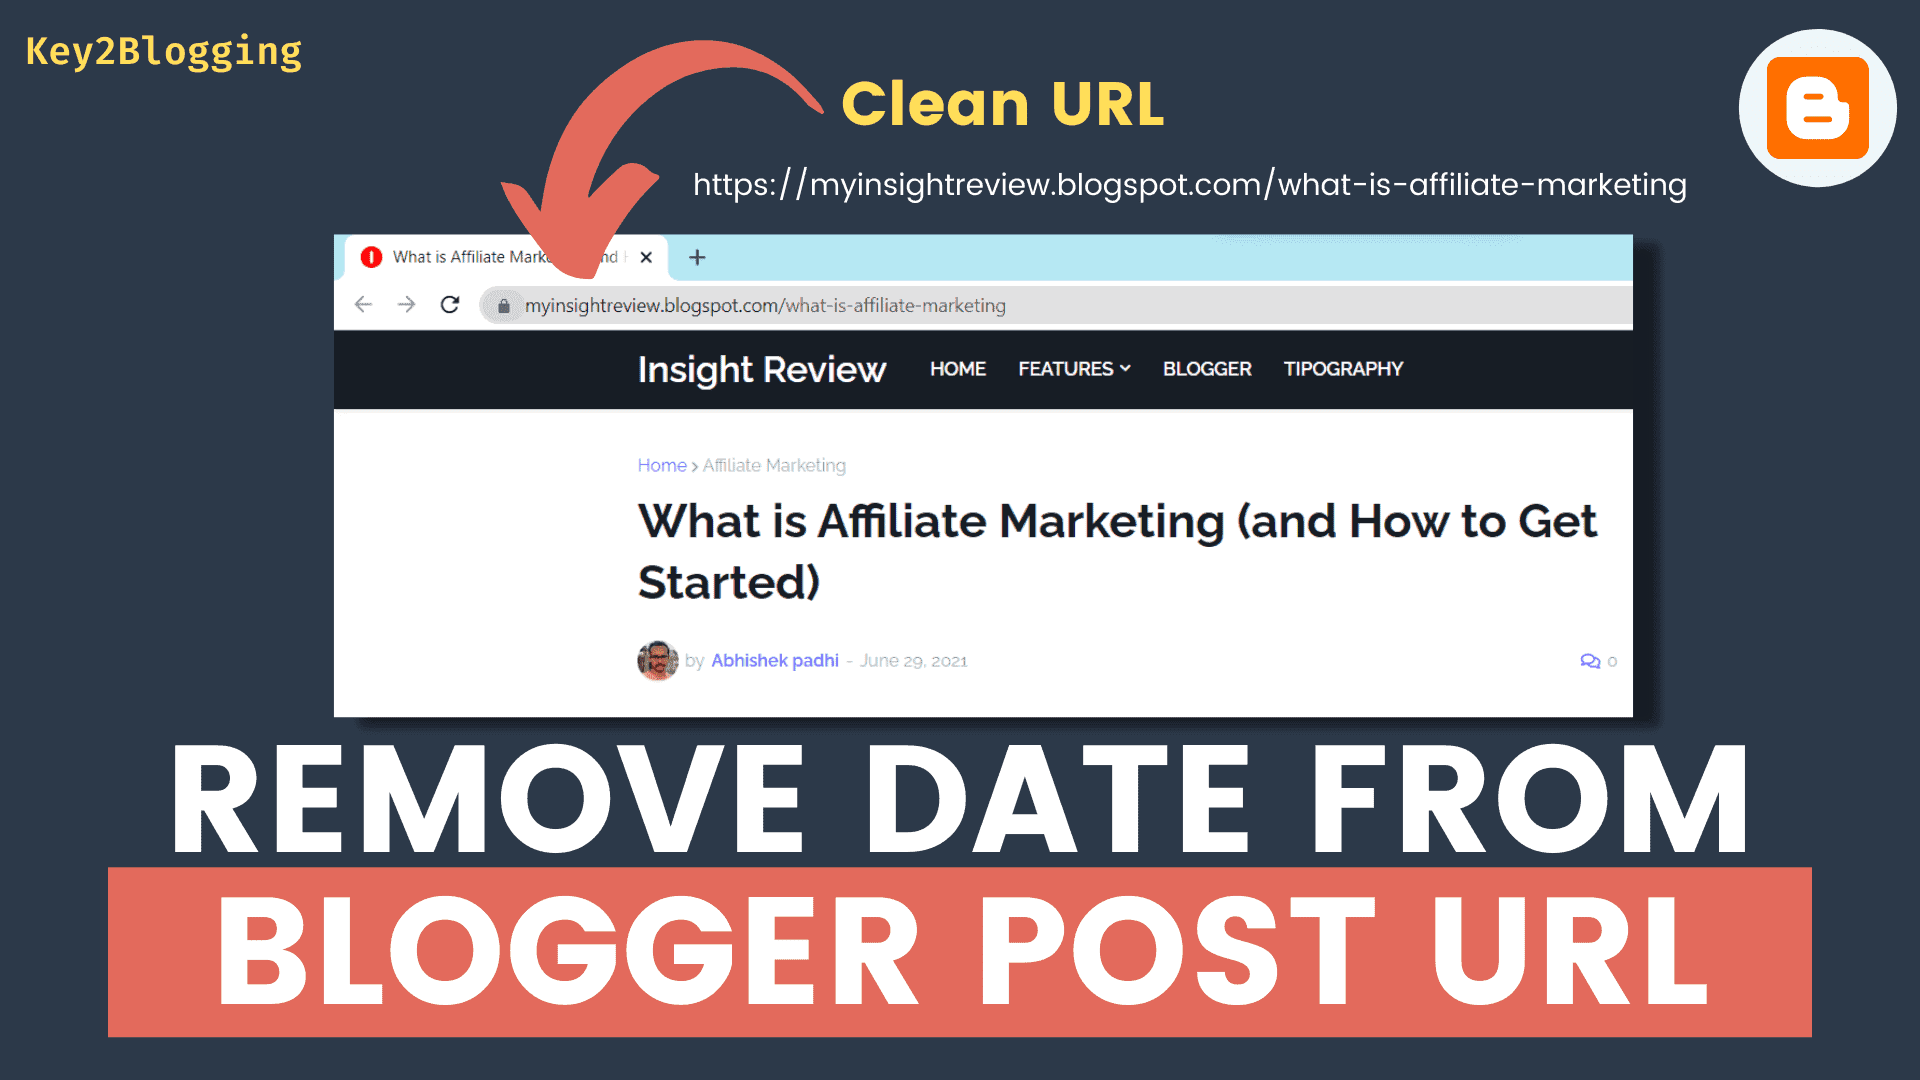 Remove Date From Blogger Post URL